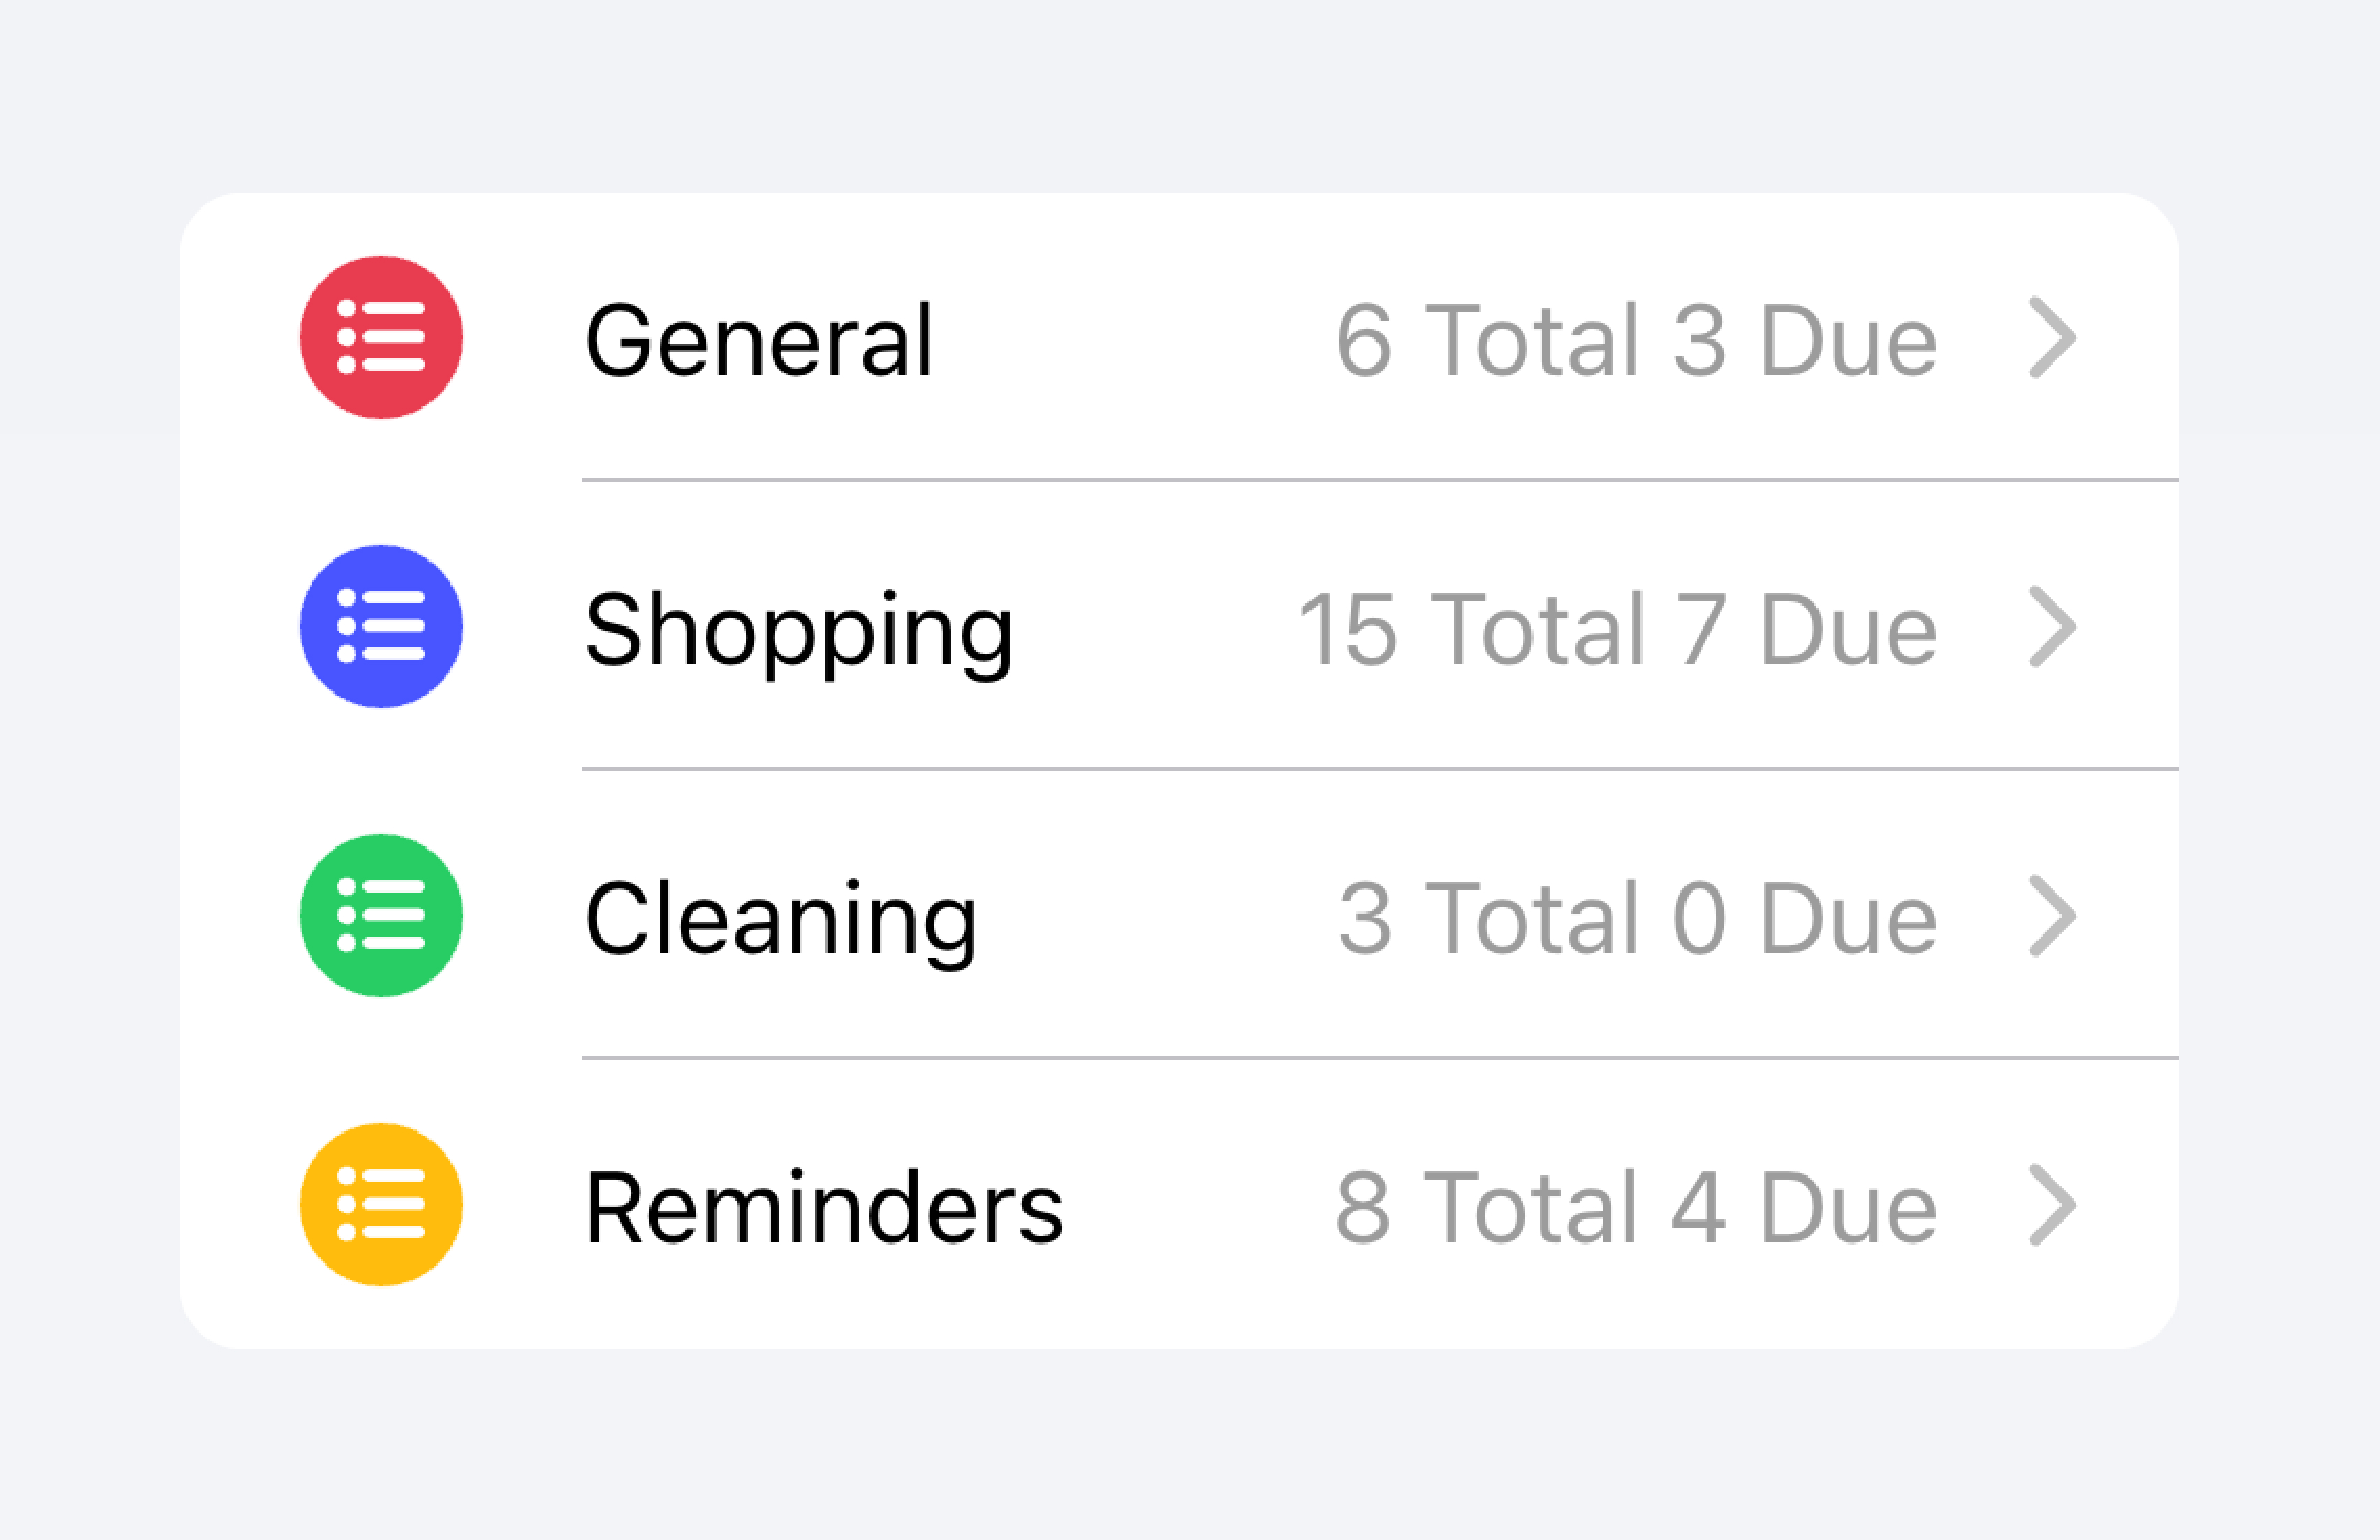 A list that contains several items, each representing a different to-do list. Two counts are placed at the end of each item: One count that states the total number of tasks, and another count that states the total number of tasks that are due today.